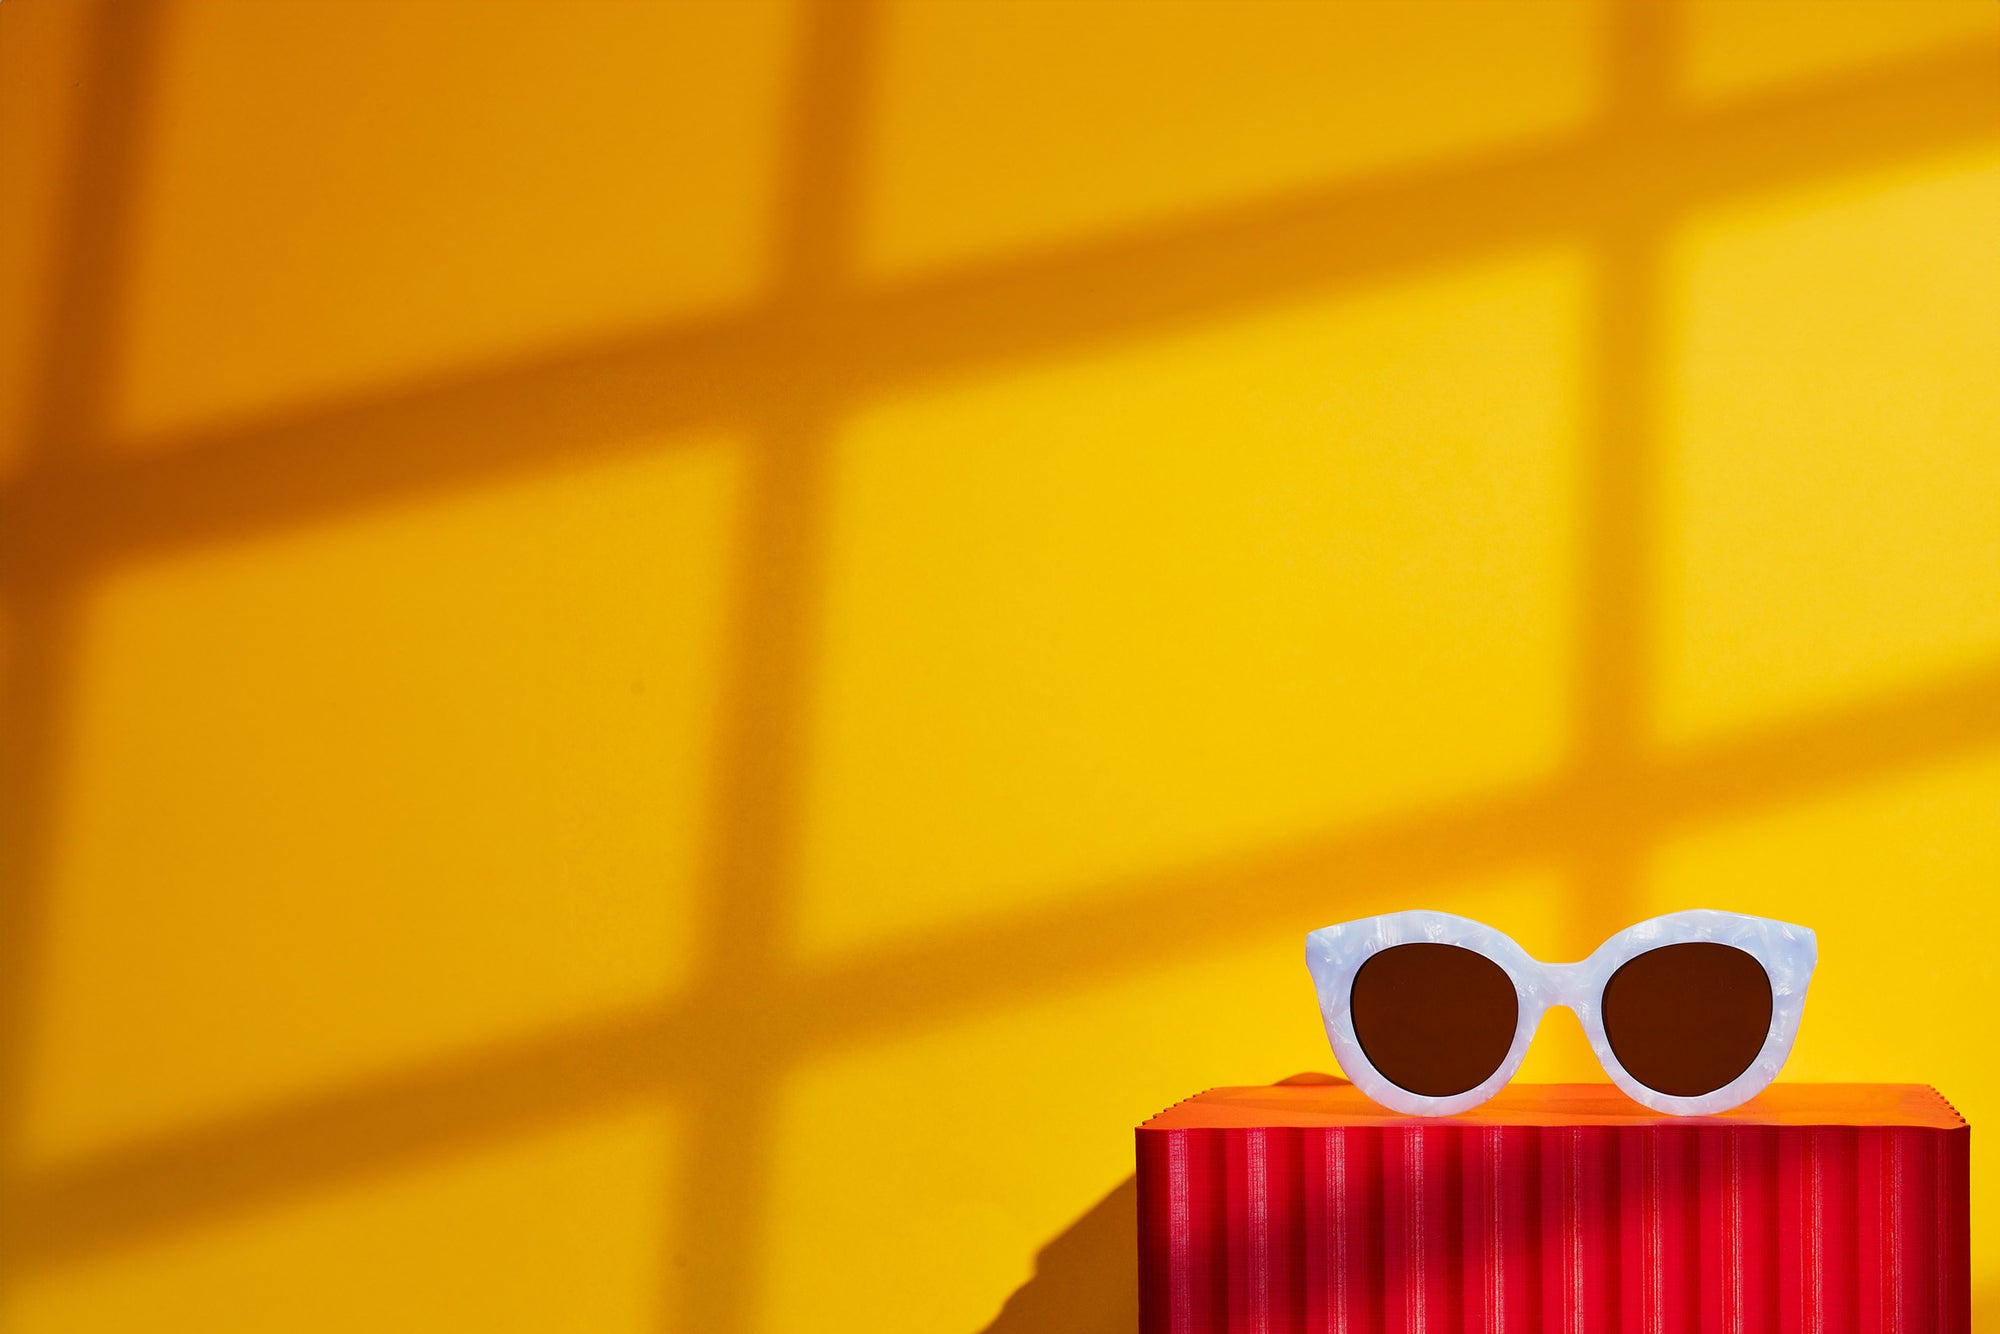 A pair of white cat eye sunglasses sat on a red box against a yellow background